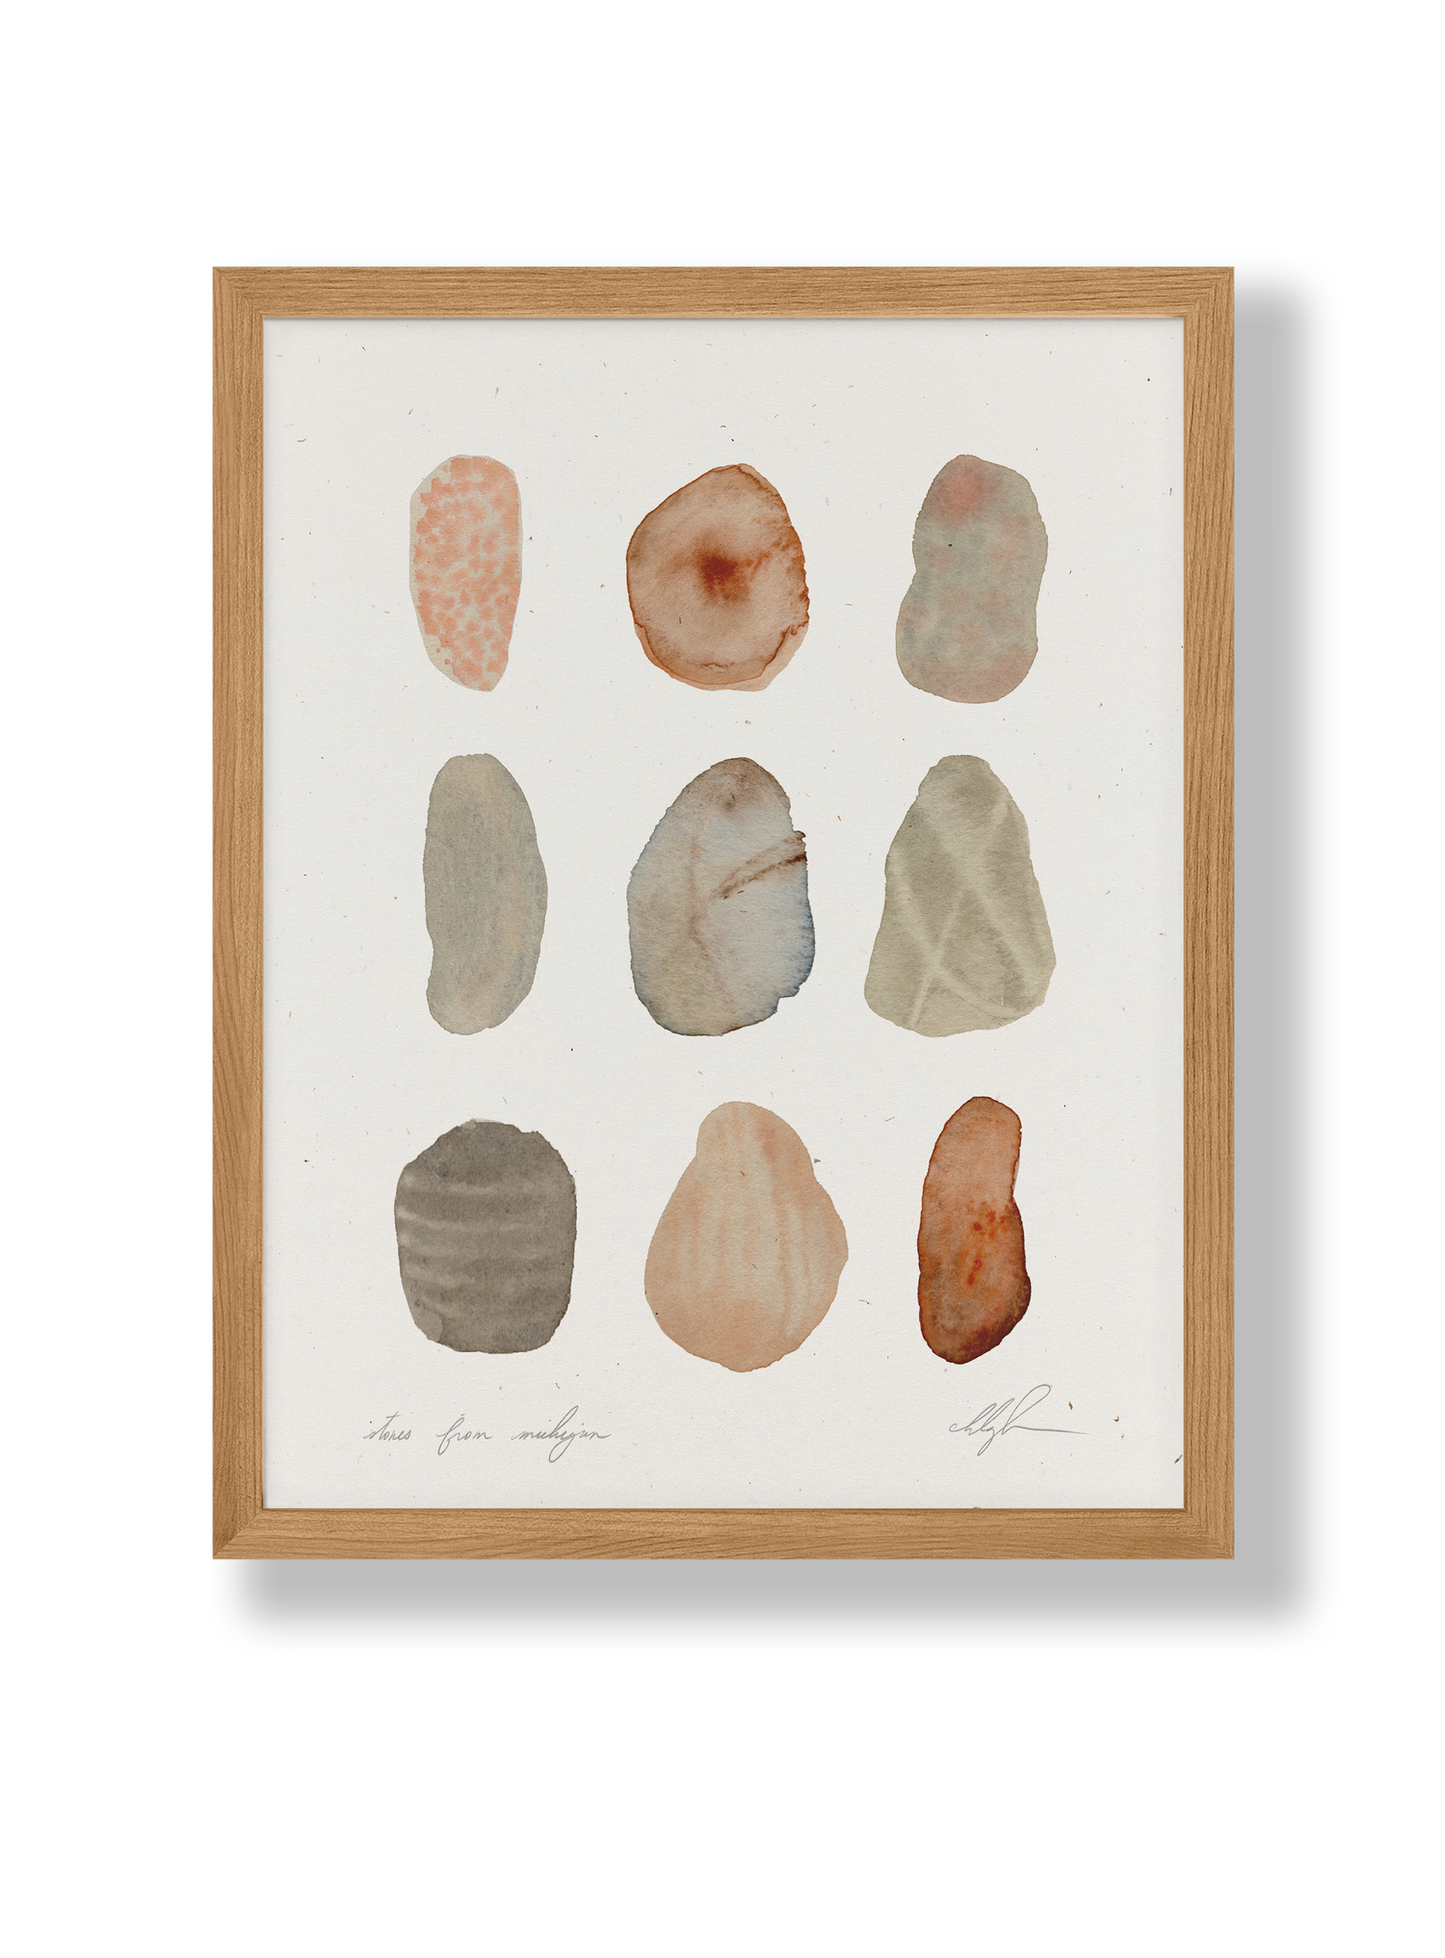 Stones From Michigan by Coco Shalom.  Prints are made with 100% recycled paper, containing 30% post consumer waste, produced with 100% green power  and 0% BS